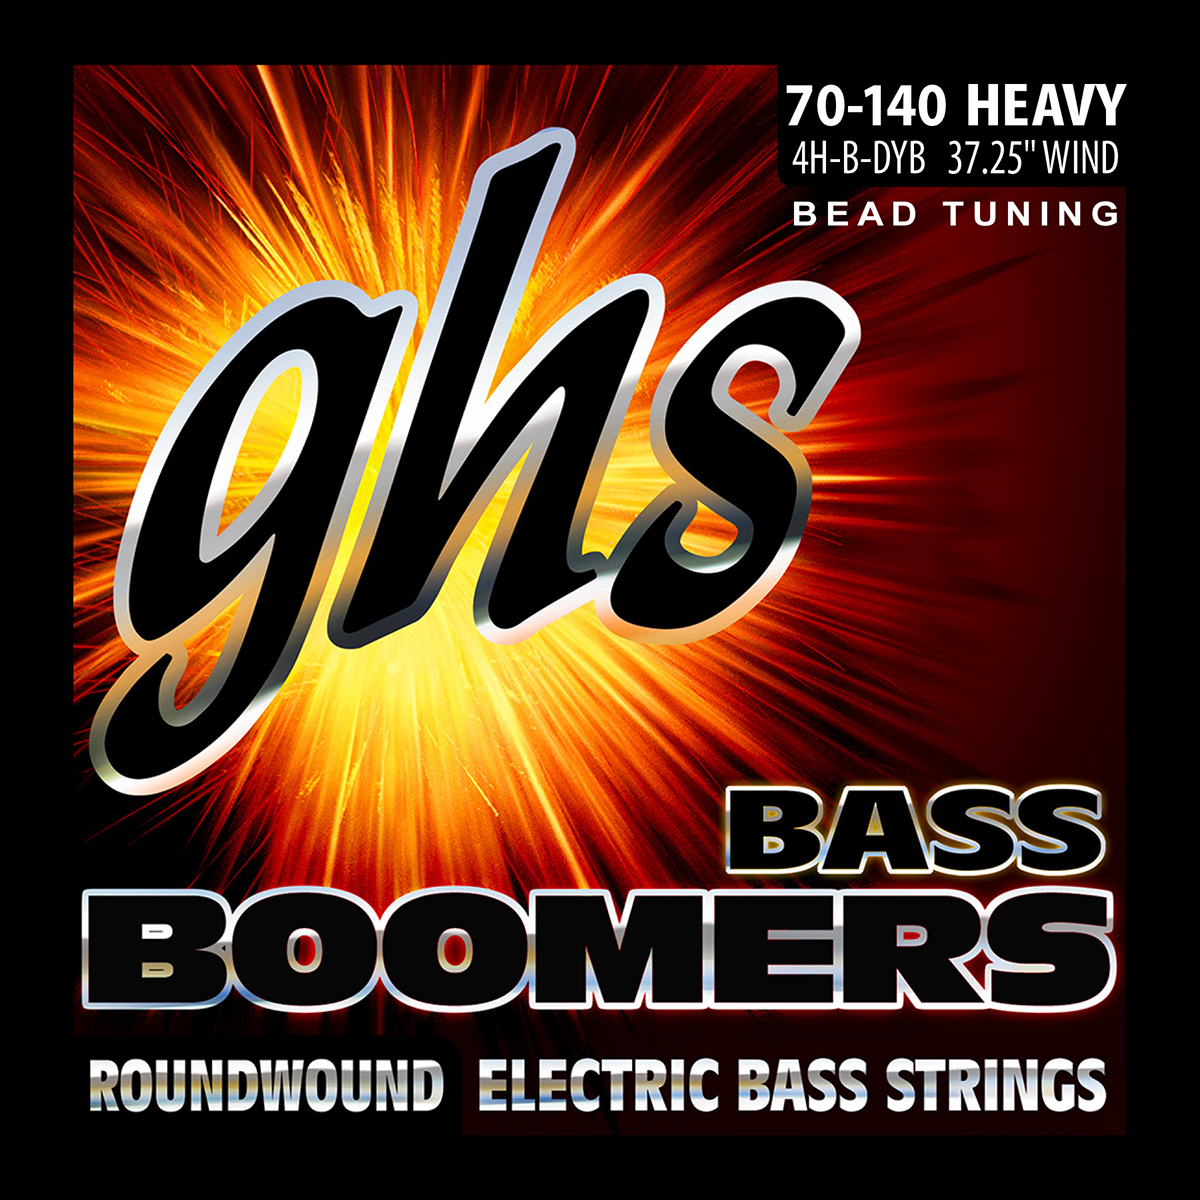 GHS Bass Boomers - Bass String Set, 4-String, Heavy, .070-.140, BEAD Tuning